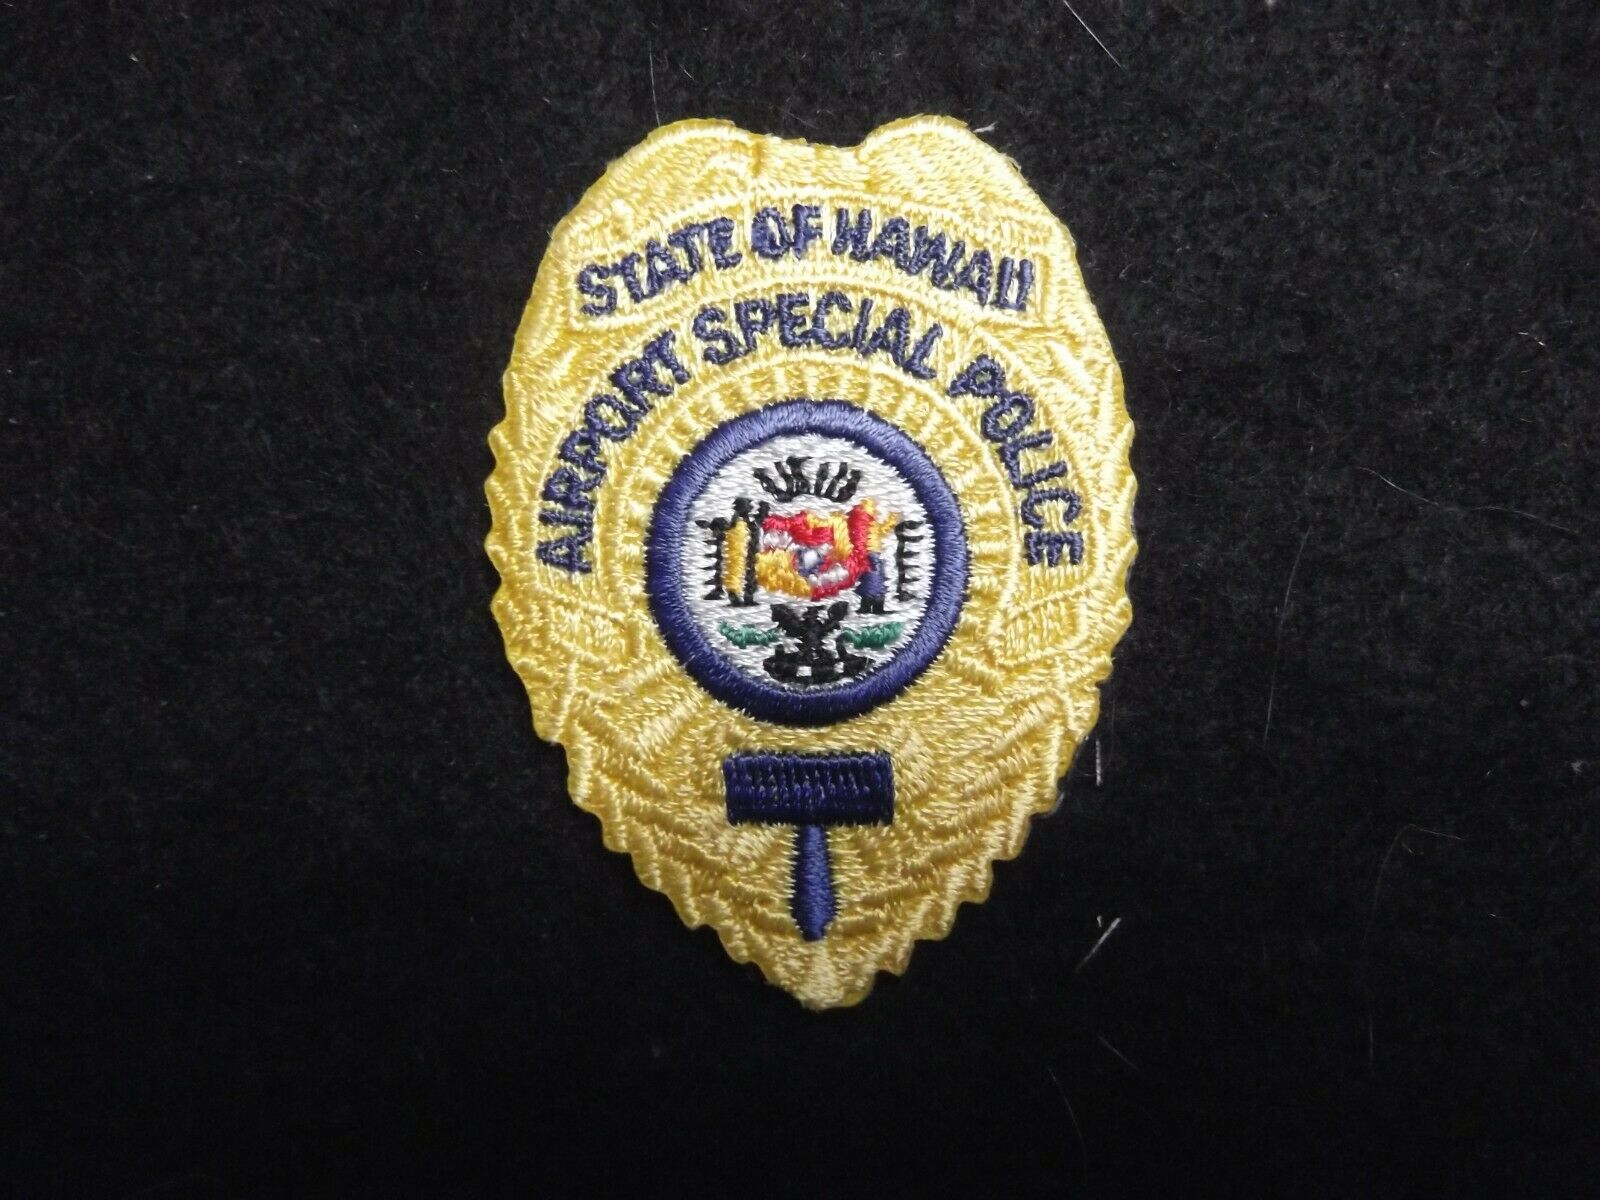 Hawaii State Airport Special Police Defunct Agency Rare Htf